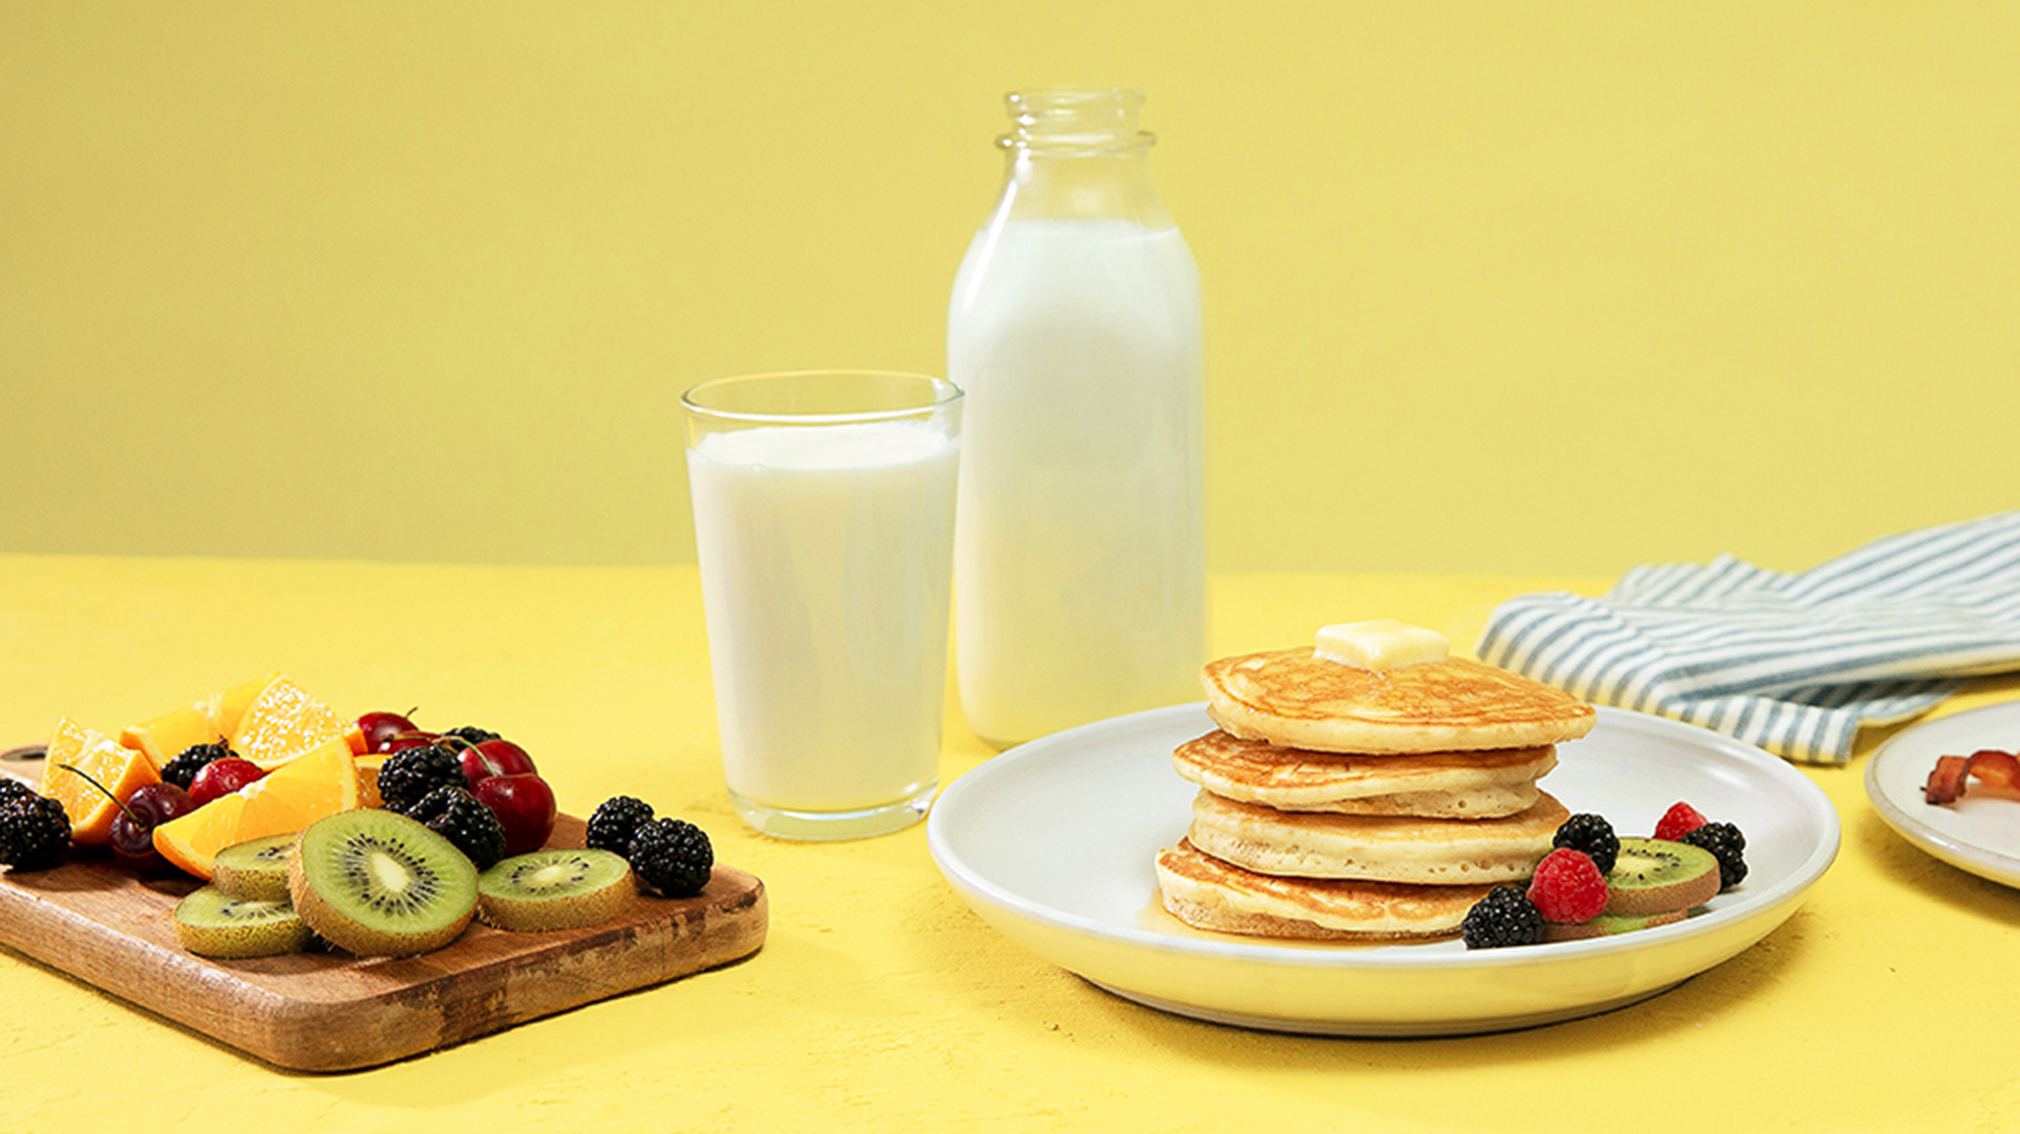 Stack of pancakes with a big glass of milk and a plate of fruit